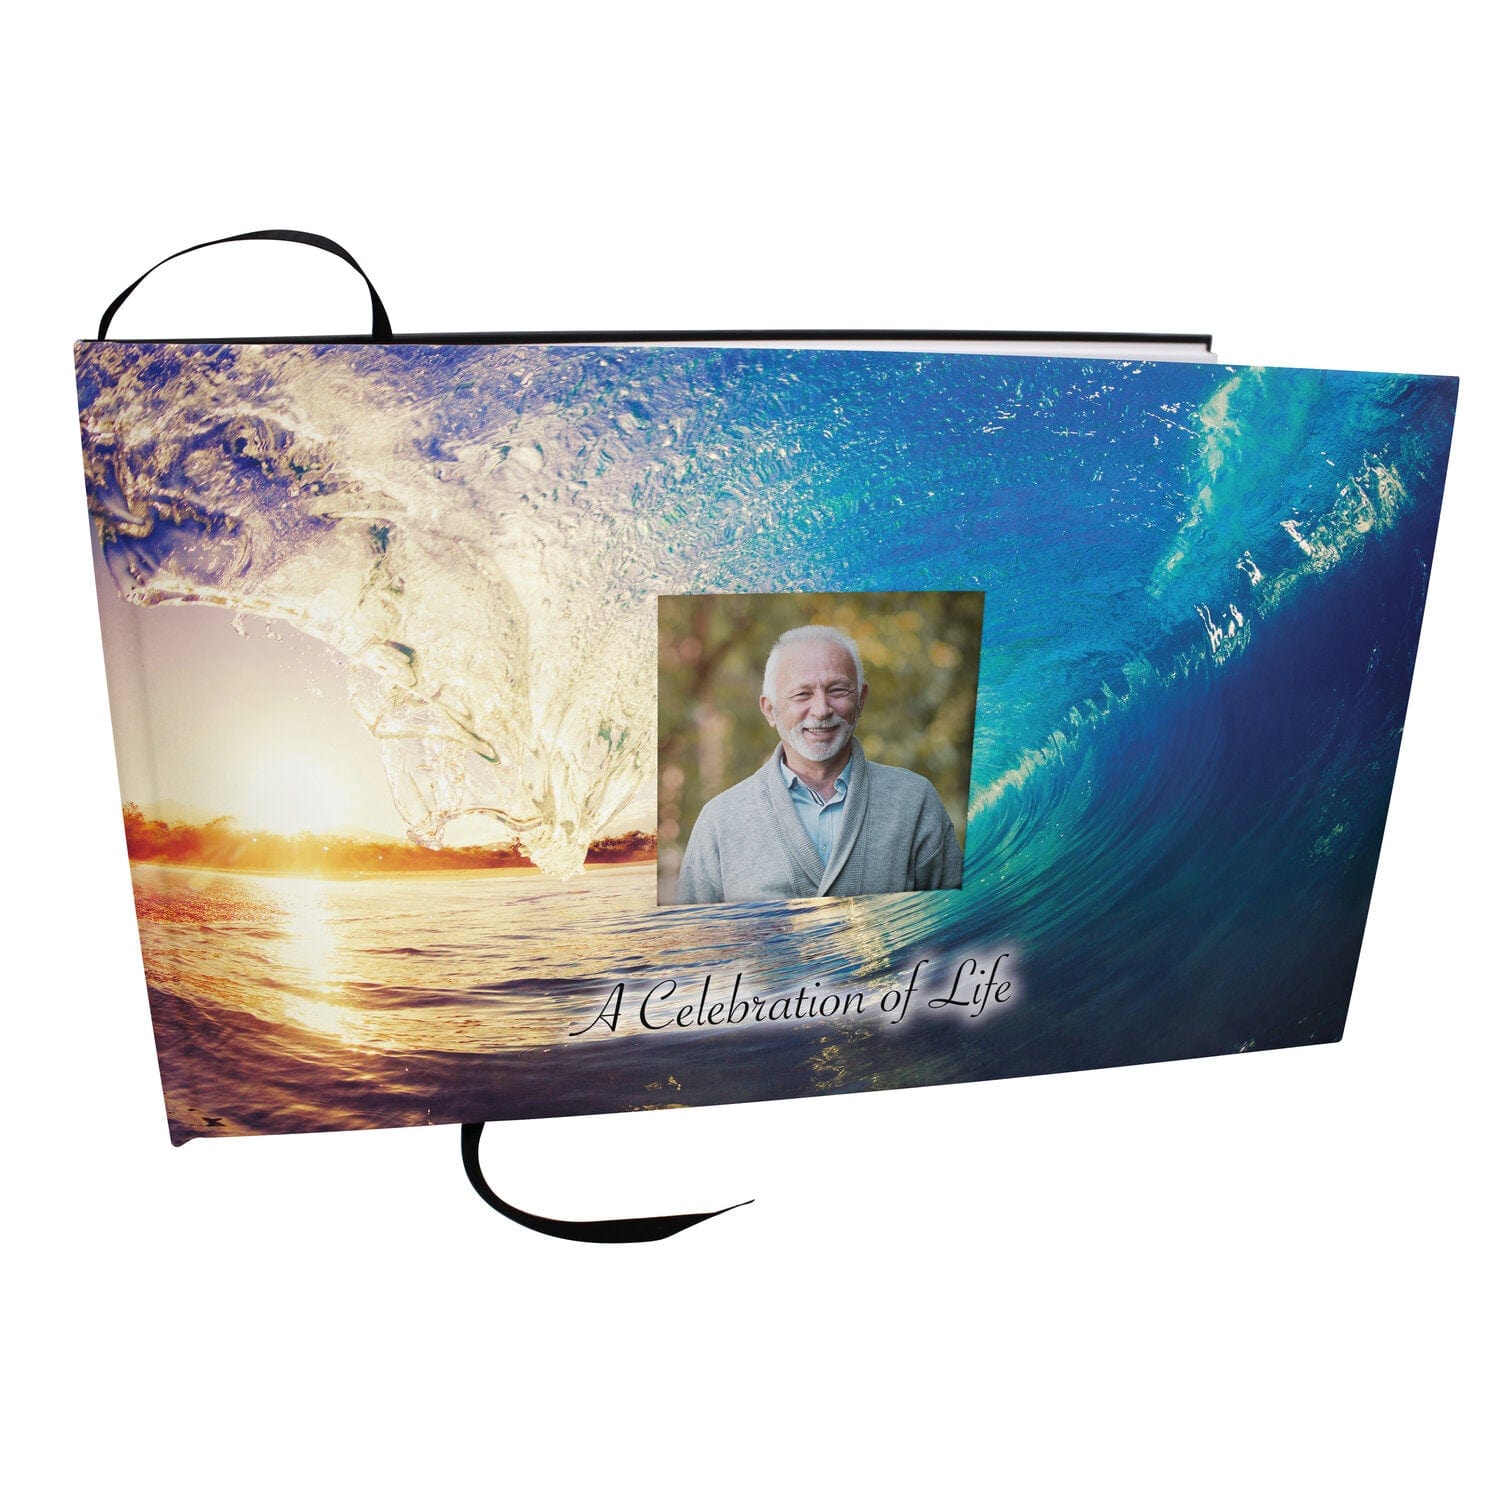 Commemorative Cremation Urns Soul Surfing Matching Themed 'Celebration of Life' Guest Book for Funeral or Memorial Service